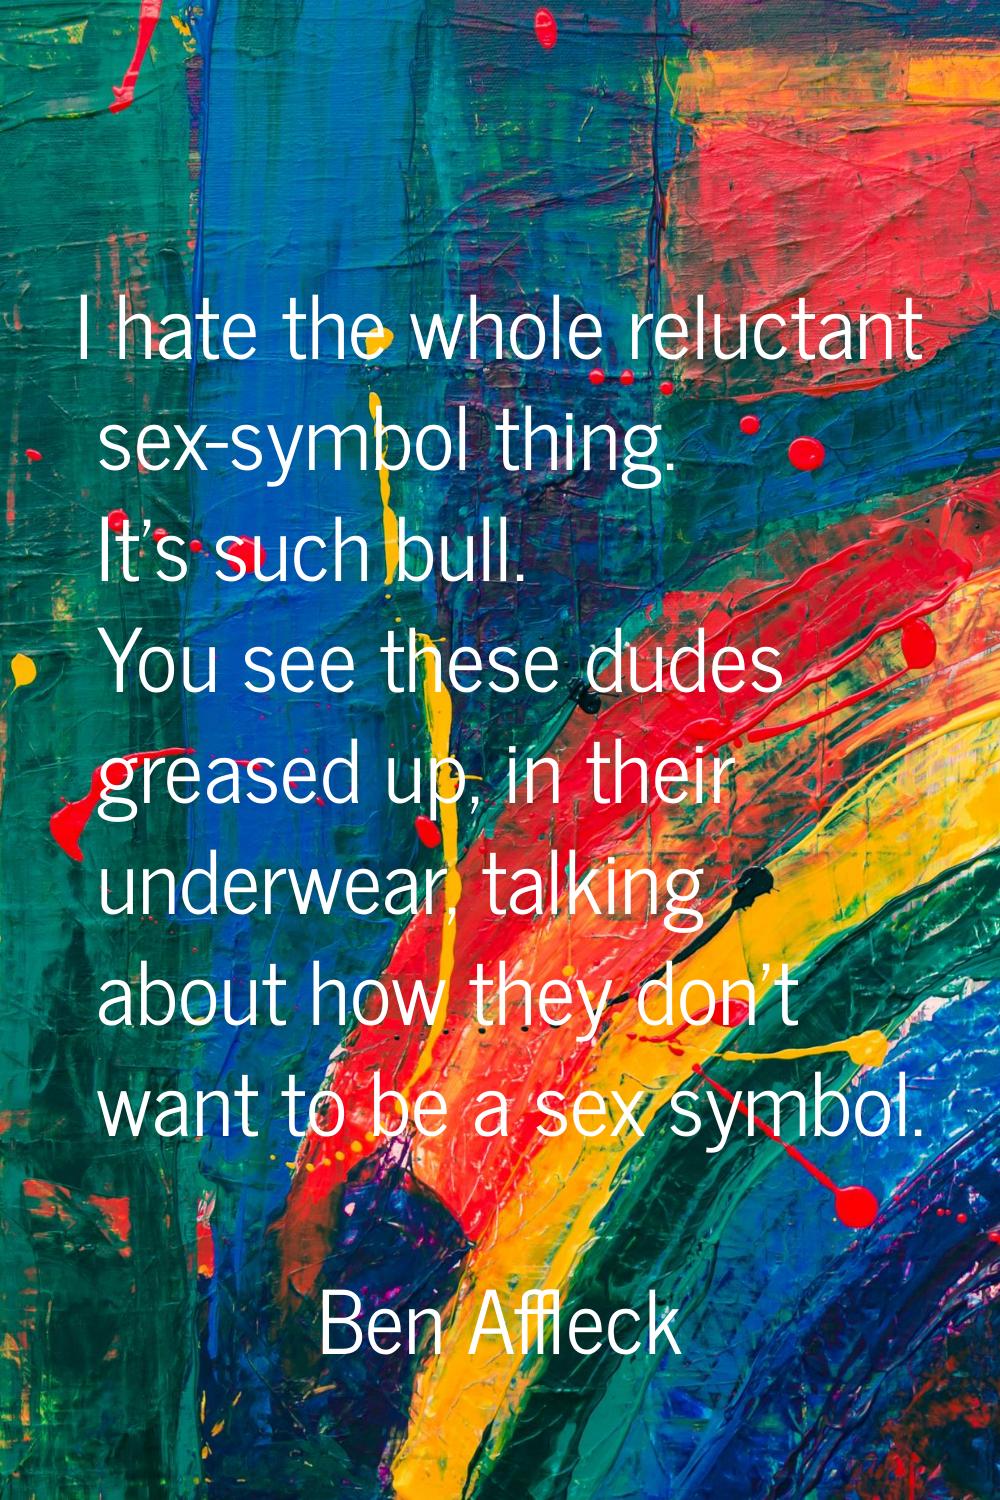 I hate the whole reluctant sex-symbol thing. It's such bull. You see these dudes greased up, in the